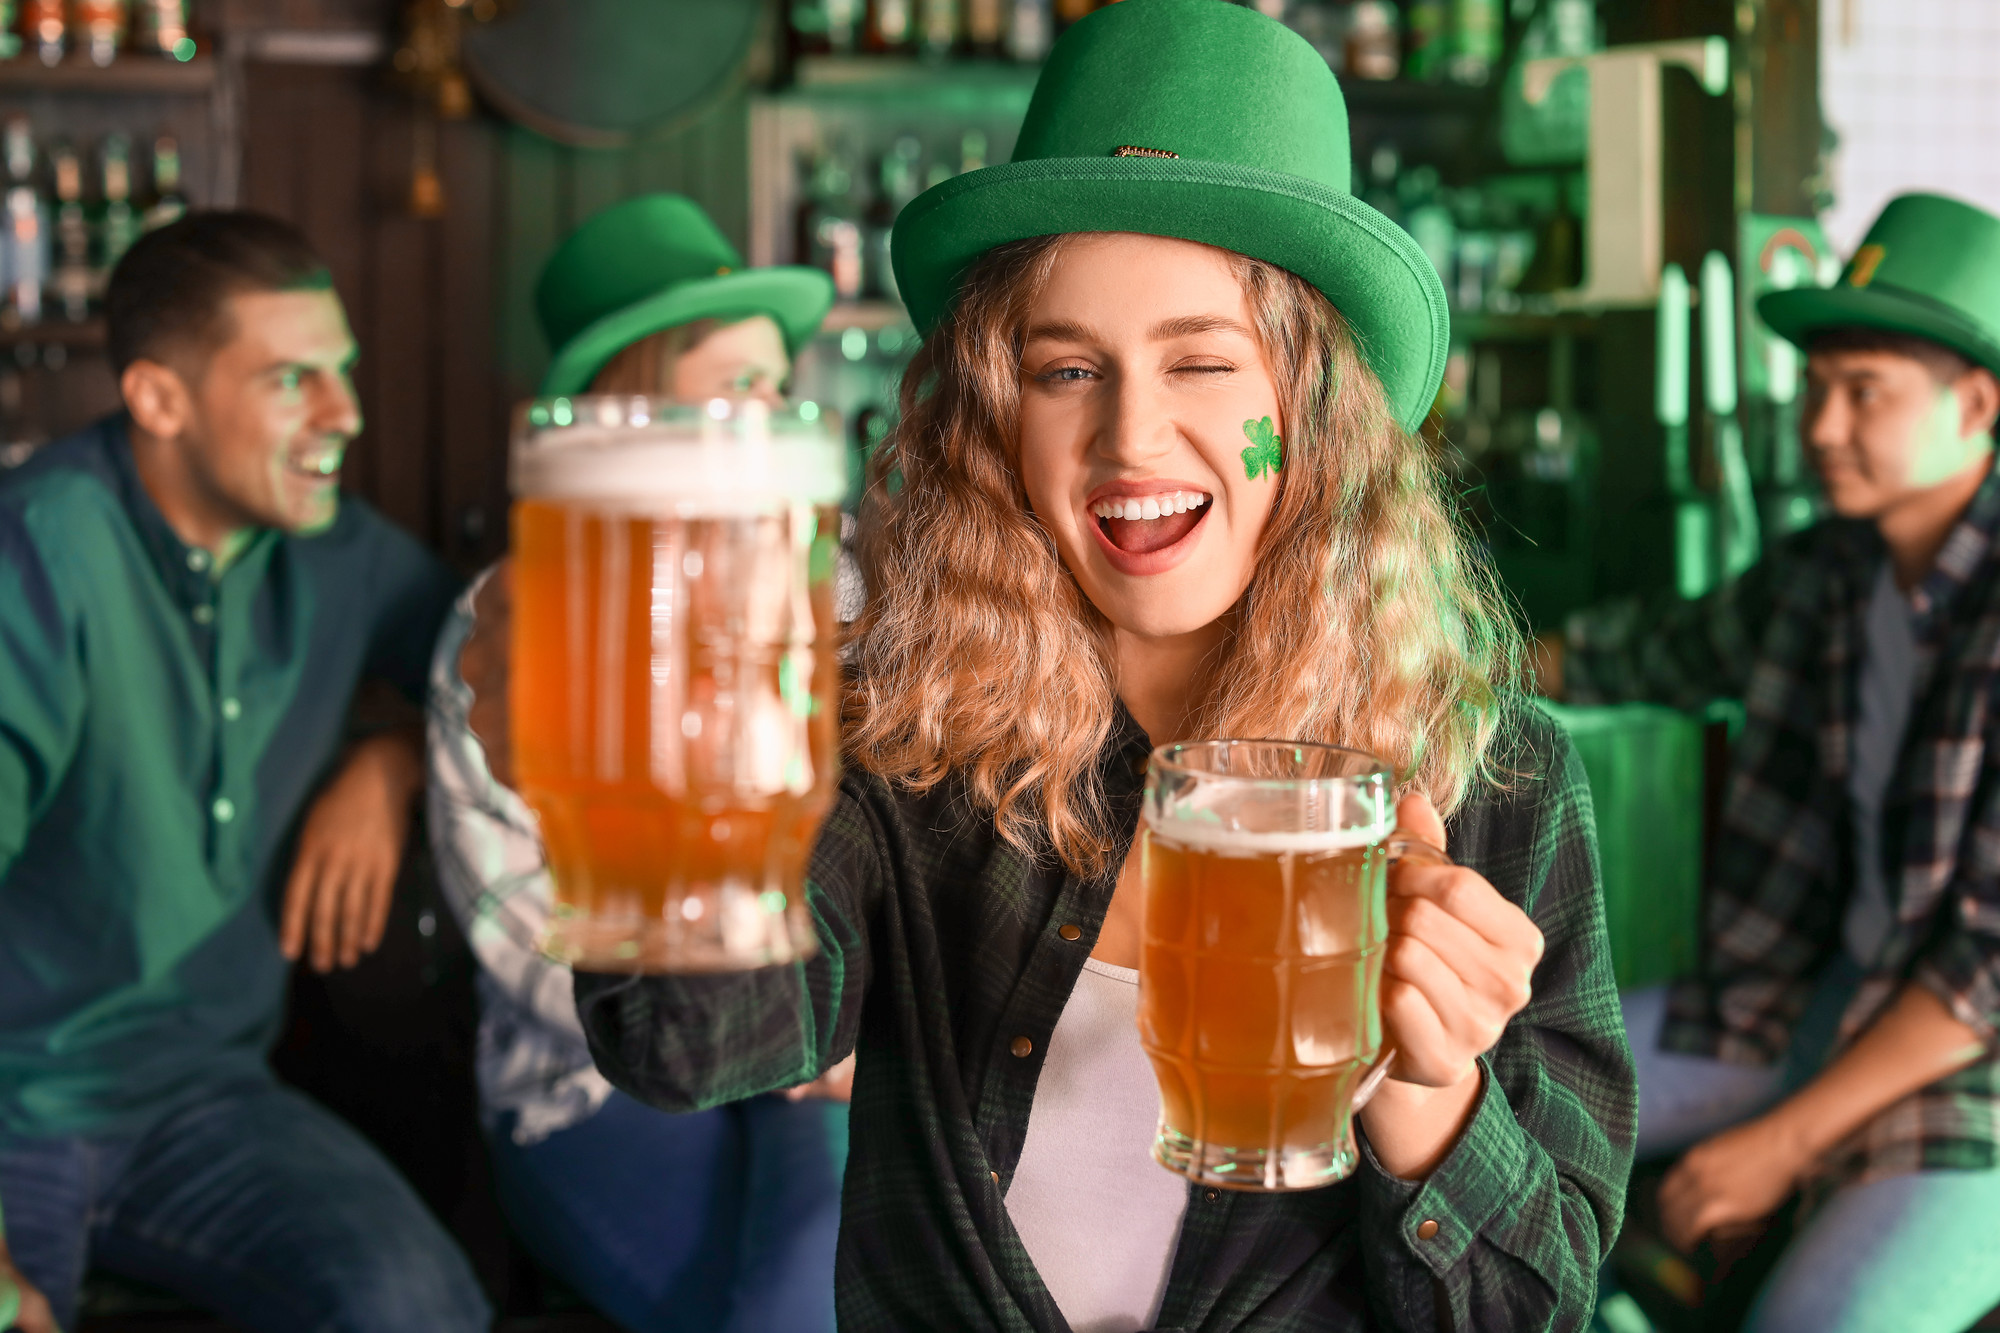 Young woman with beer celebrating St. Patrick’s Day in pub